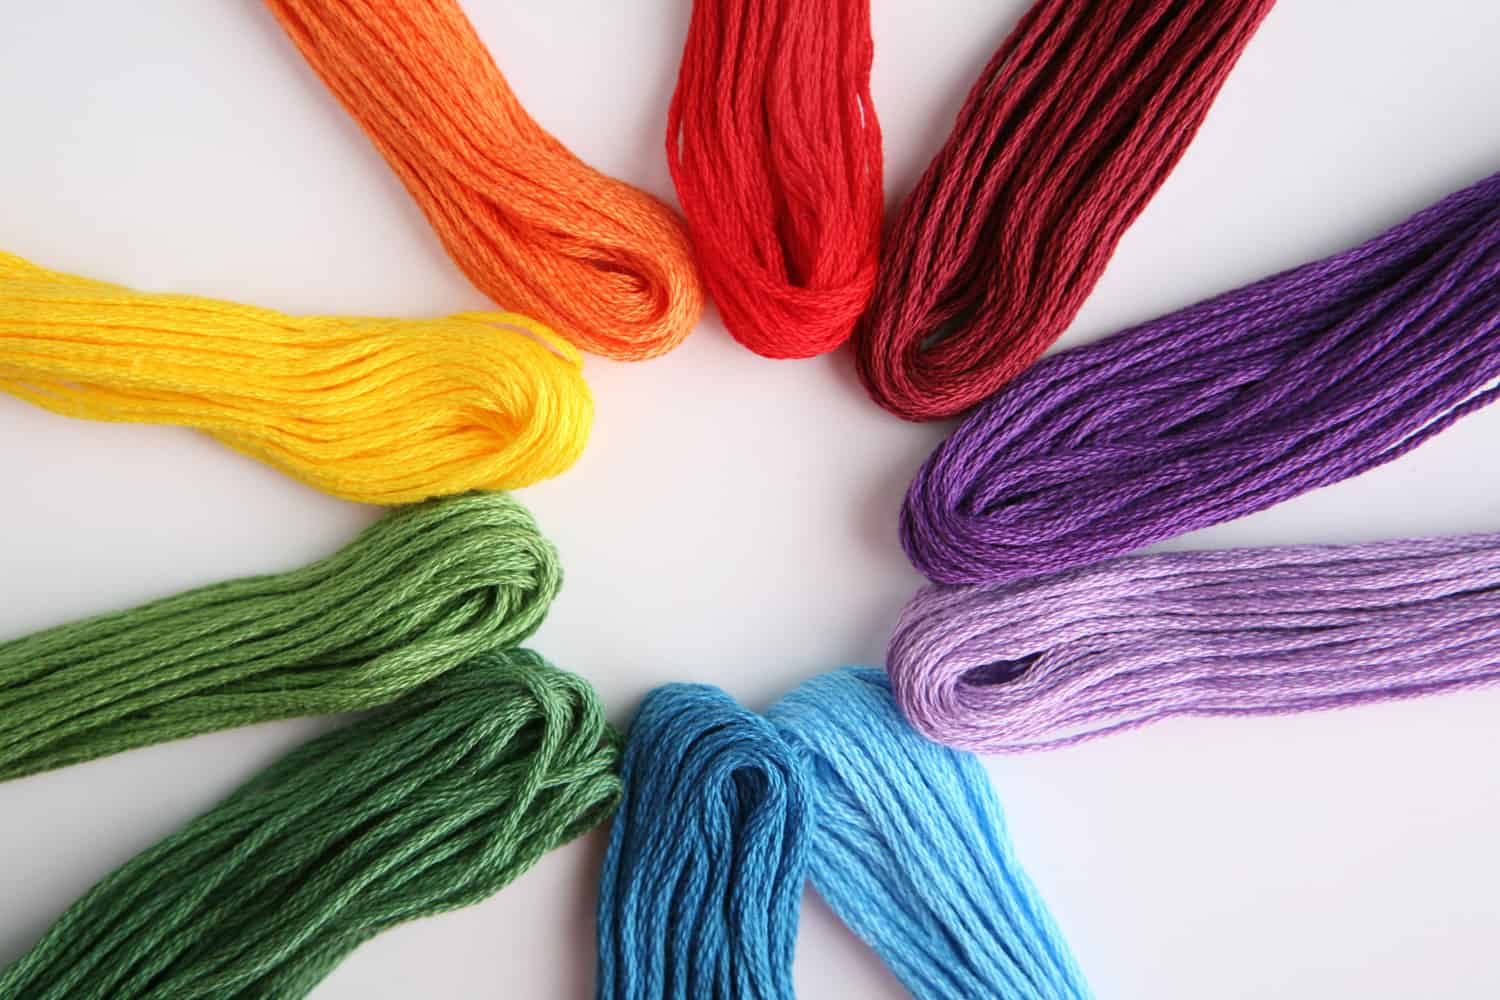 Different colored threads on a white background